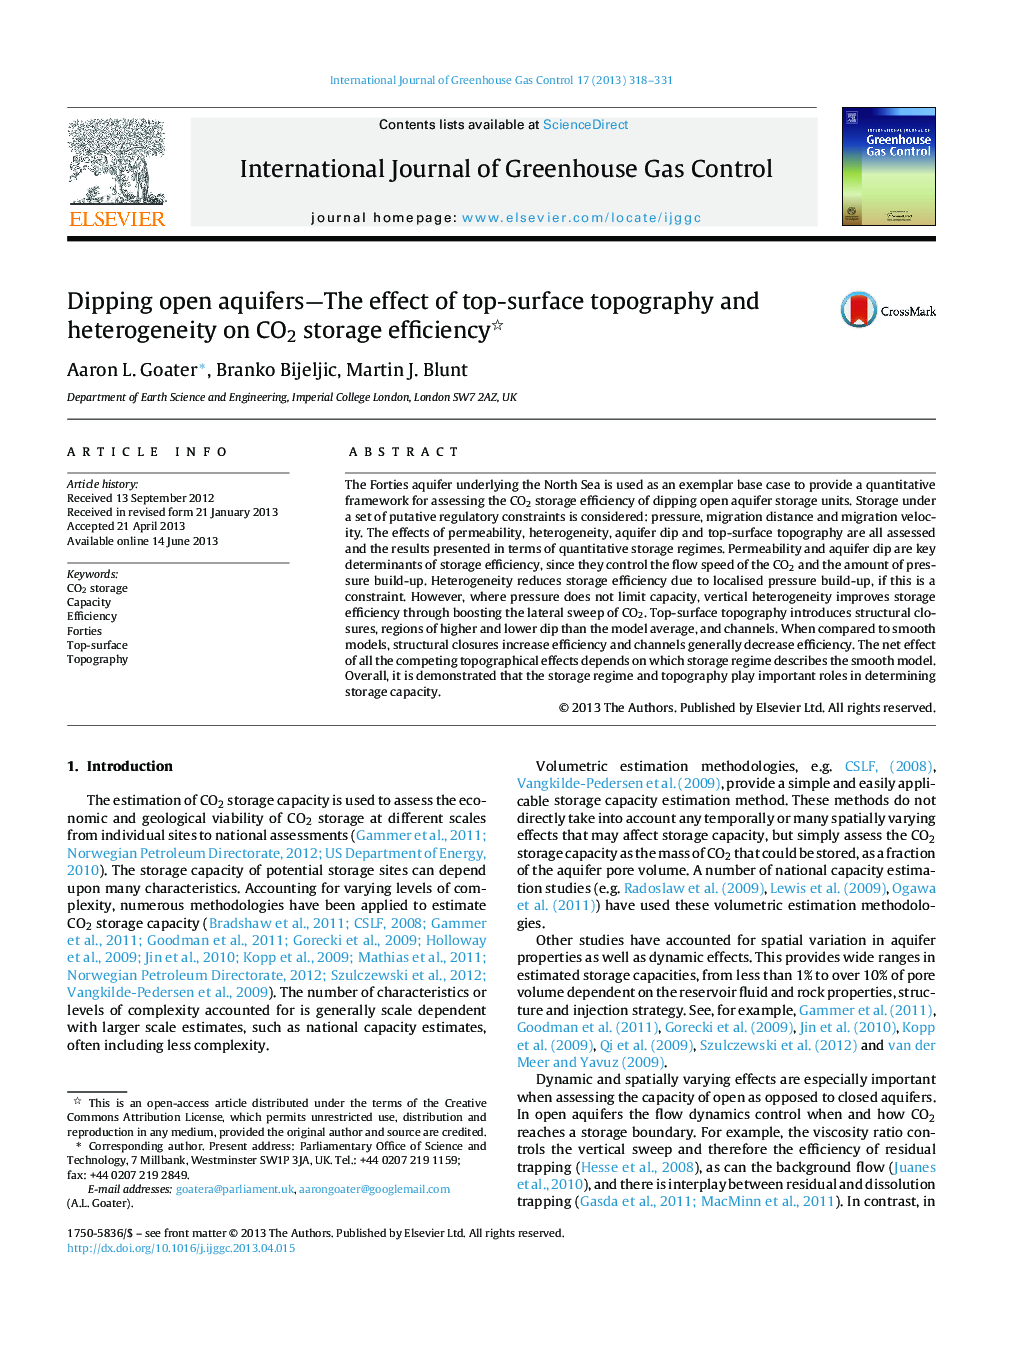 Dipping open aquifers-The effect of top-surface topography and heterogeneity on CO2 storage efficiency